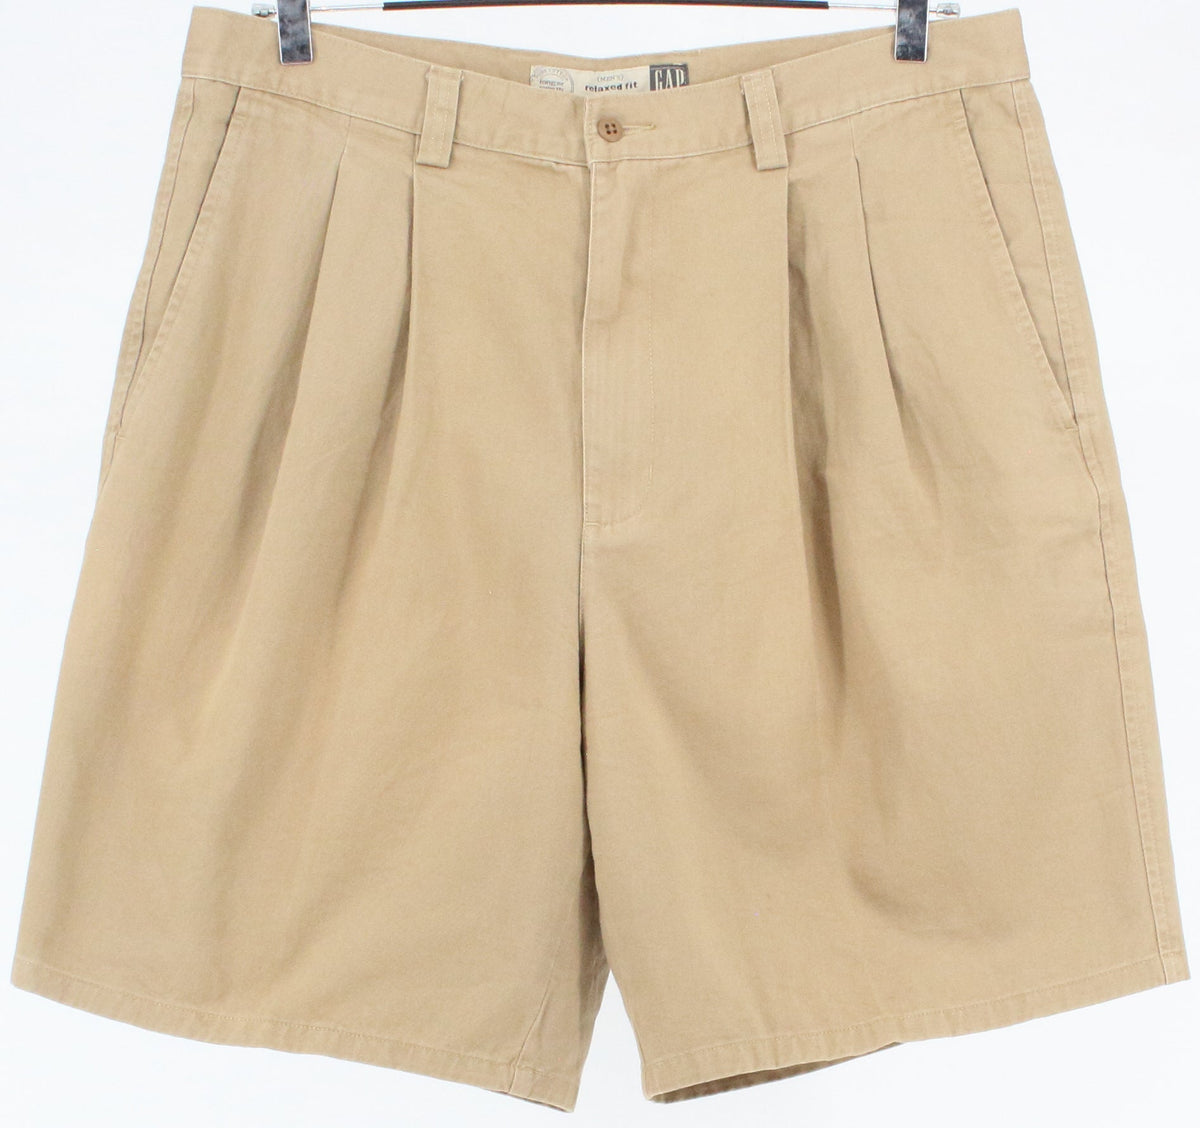 Gap Khaki Relaxed Fit Pleated Shorts